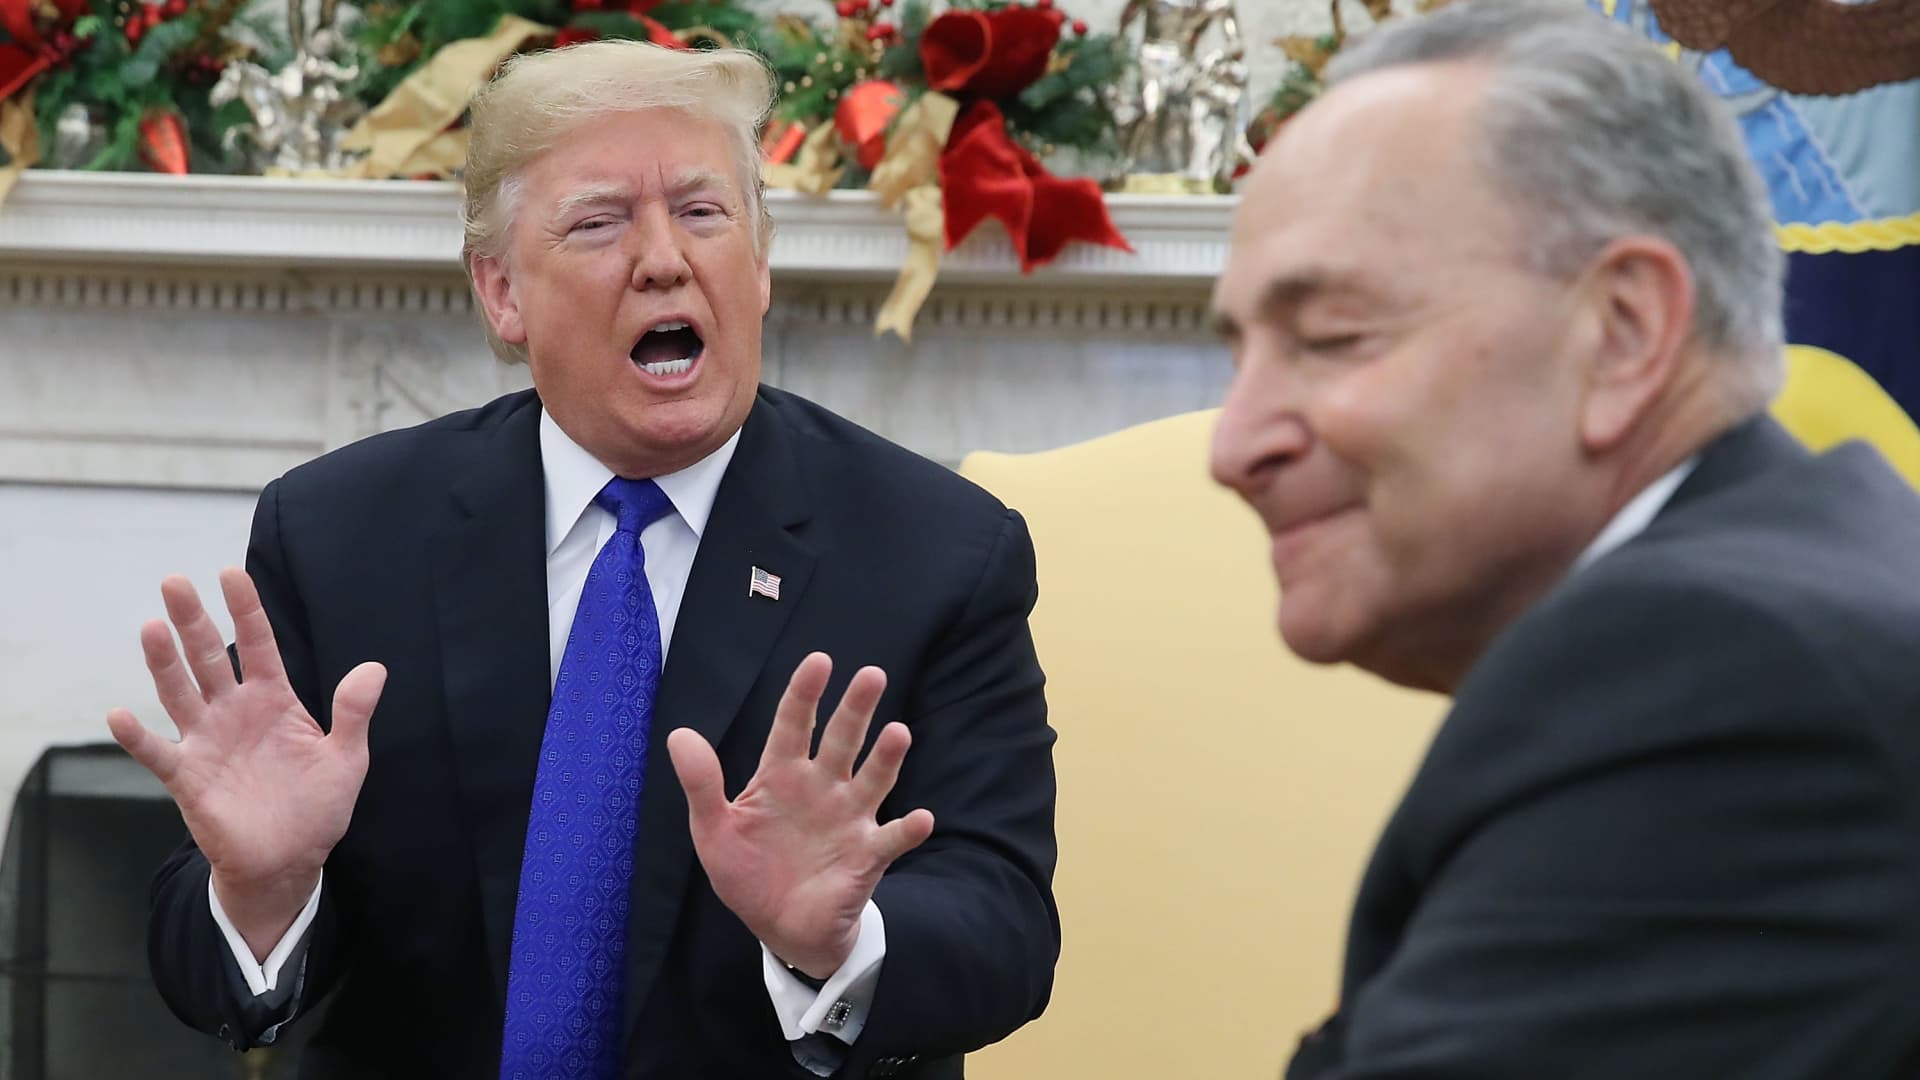 President Donald Trump argues about border security with Senate Minority Leader Chuck Schumer (D-NY) in the Oval Office on December 11, 2018 in Washington, DC.